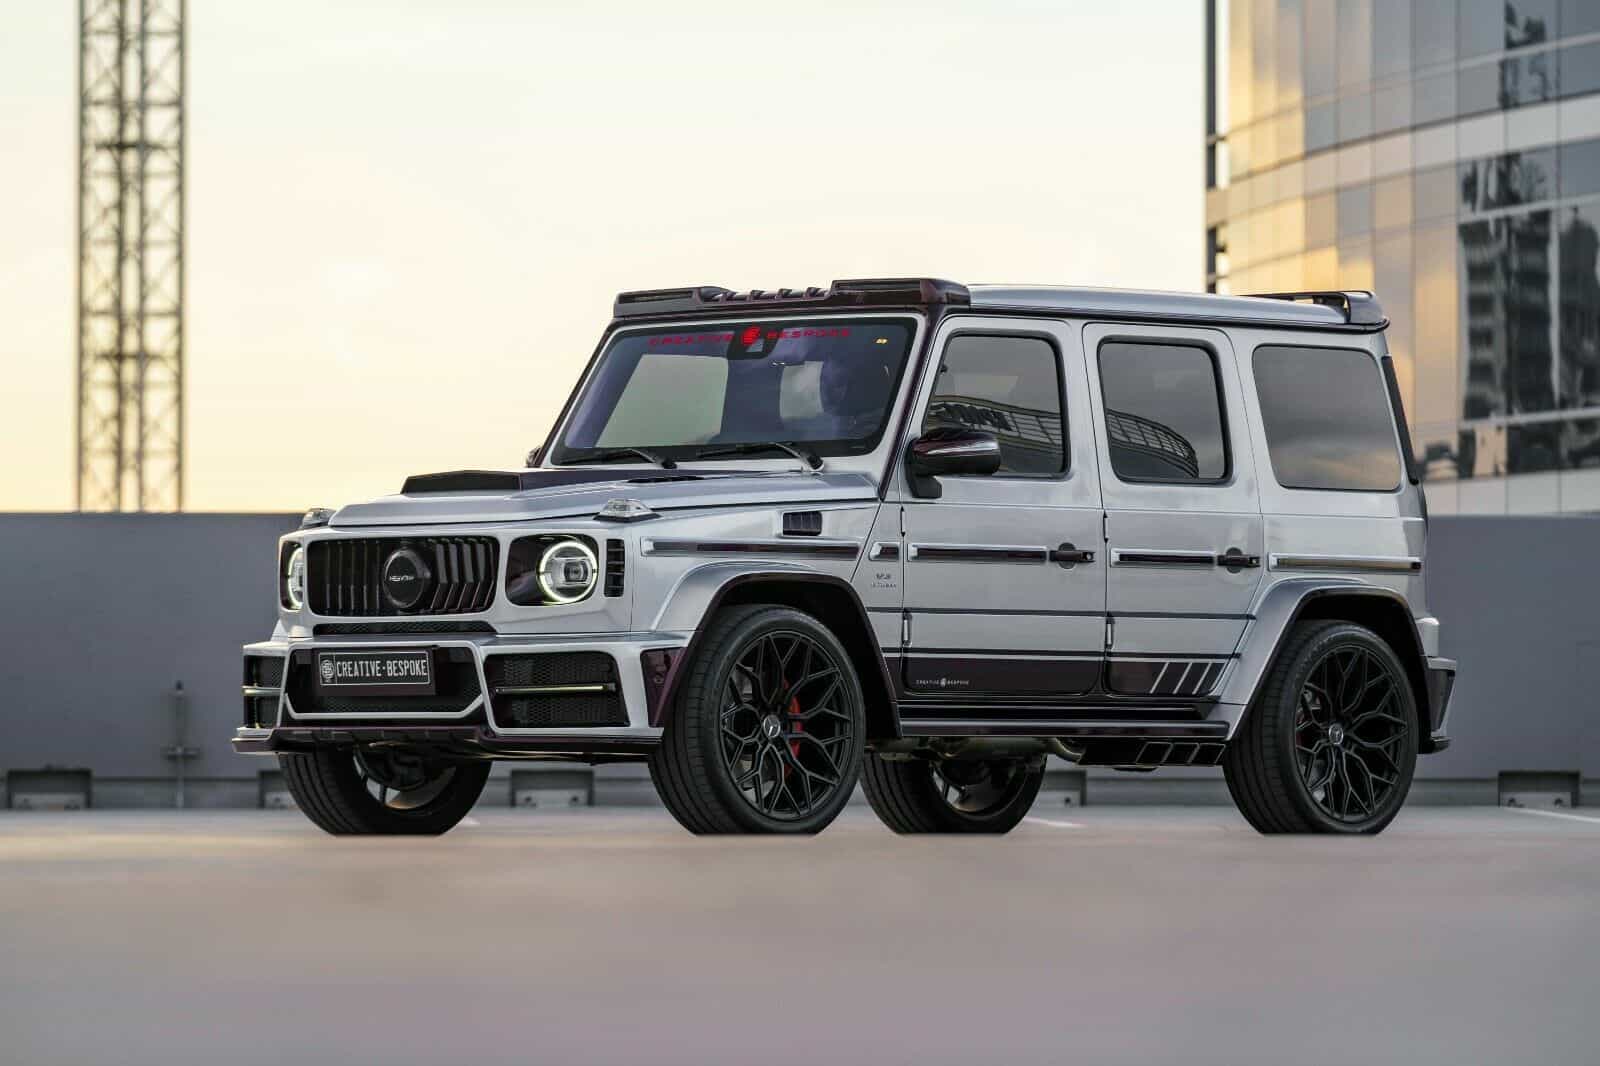 Mercedes-AMG G63 with Hermes body kit Is a Real Killer - MAXTUNCARS